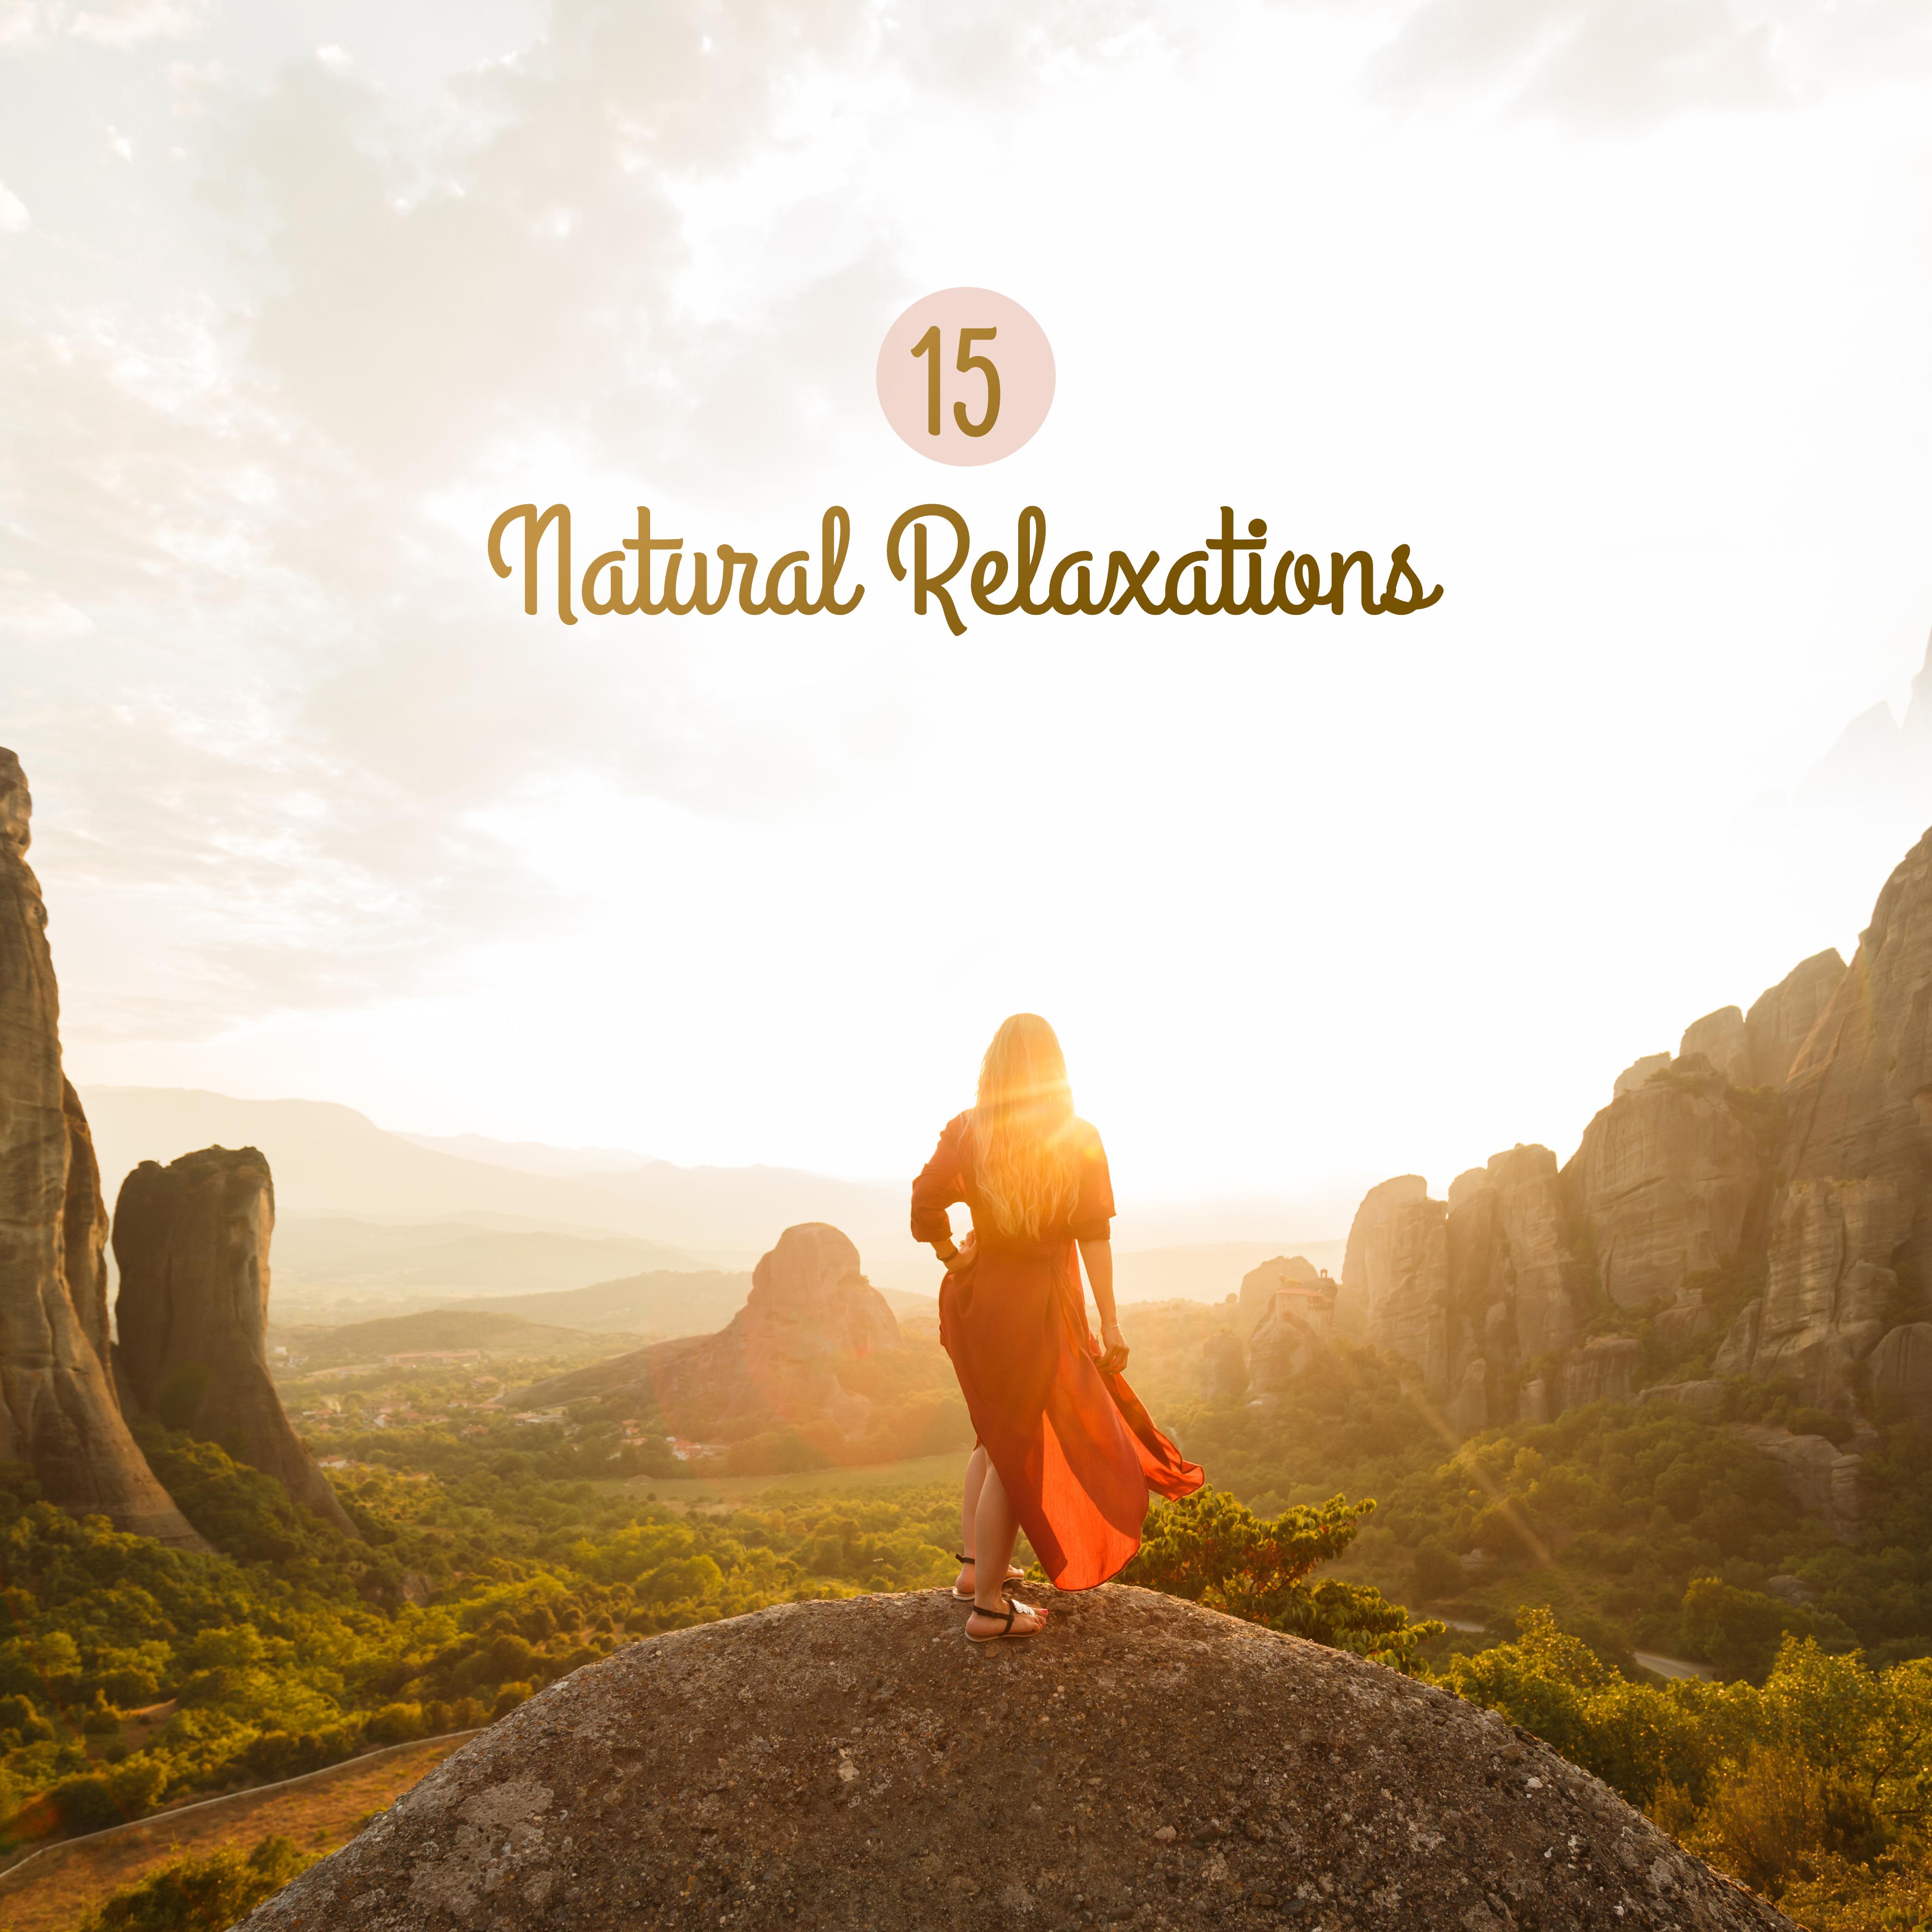 15 Natural Relaxations: 2019 New Age Nature & Piano Music for Full Calm Down & Rest, Total Relaxation After Tough Day, Restore Your Vital Energy, Recover the Internal Balance